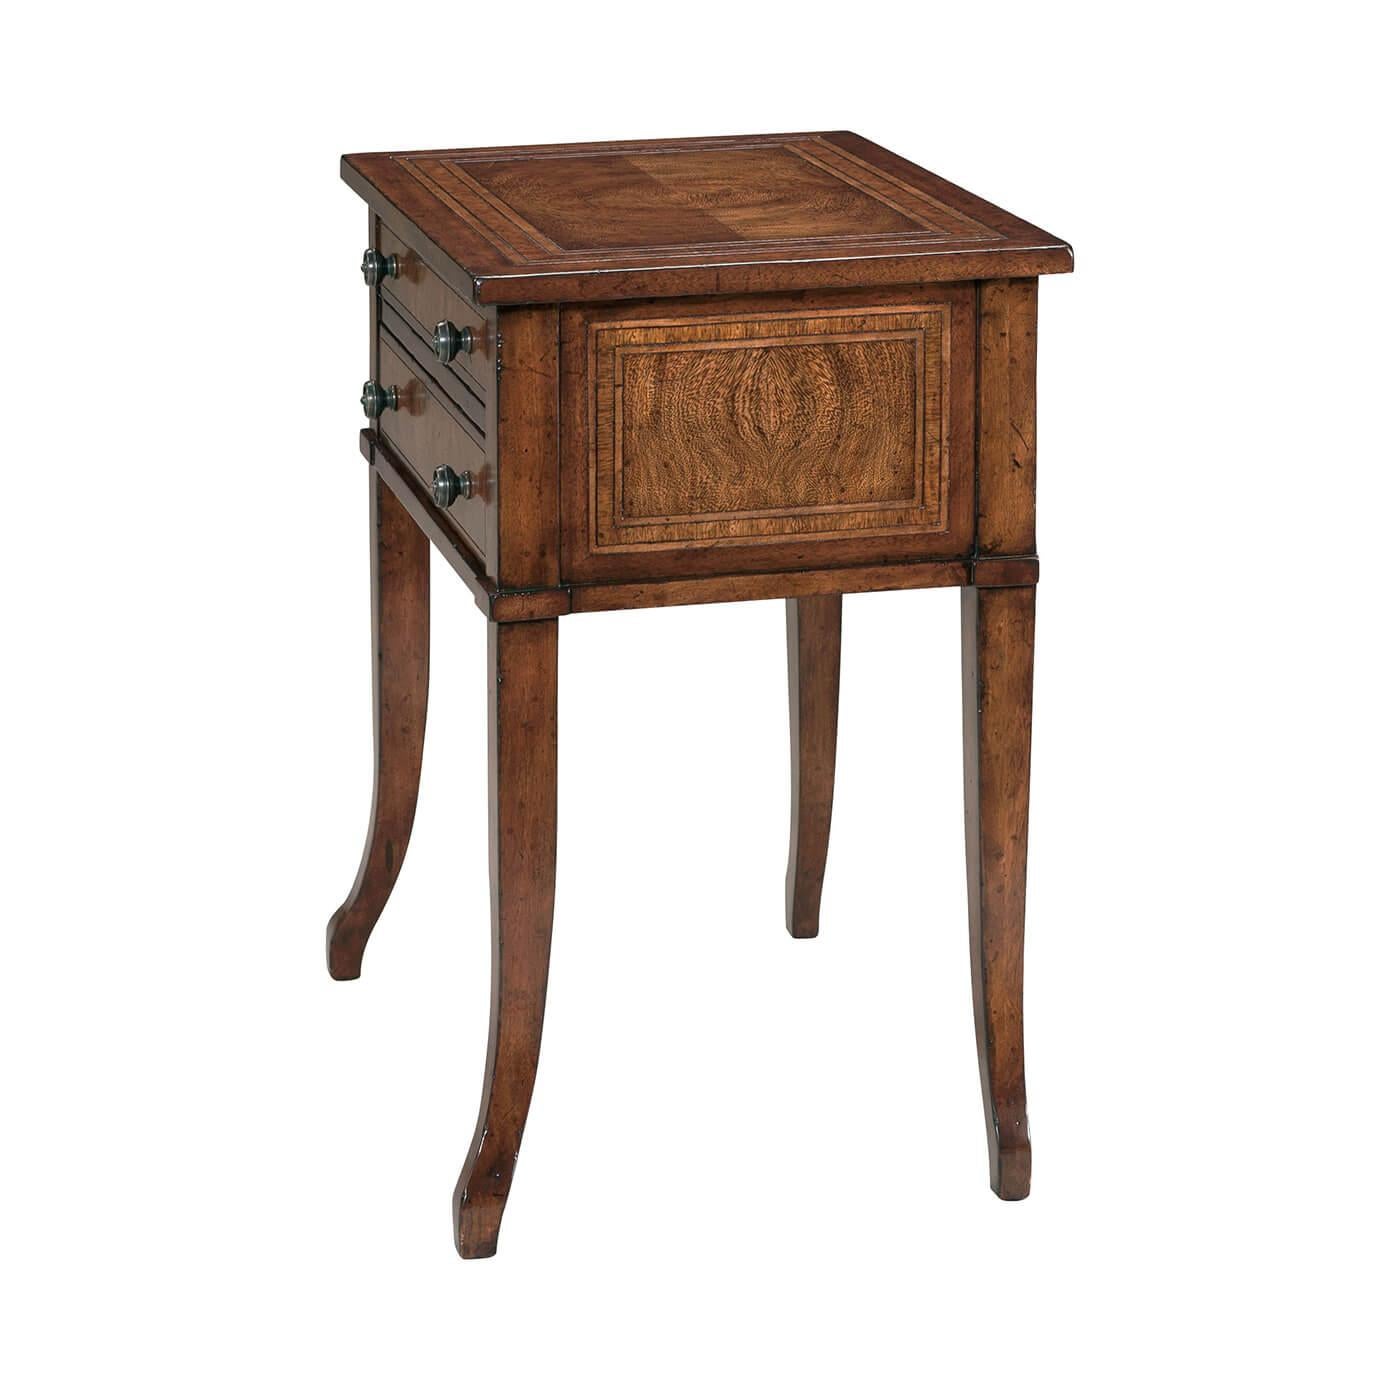 An Italian Neo-Classic style mahogany end table, the rectangular crossbanded top above two graduated drawers, on splayed legs. 

Dimensions: 22